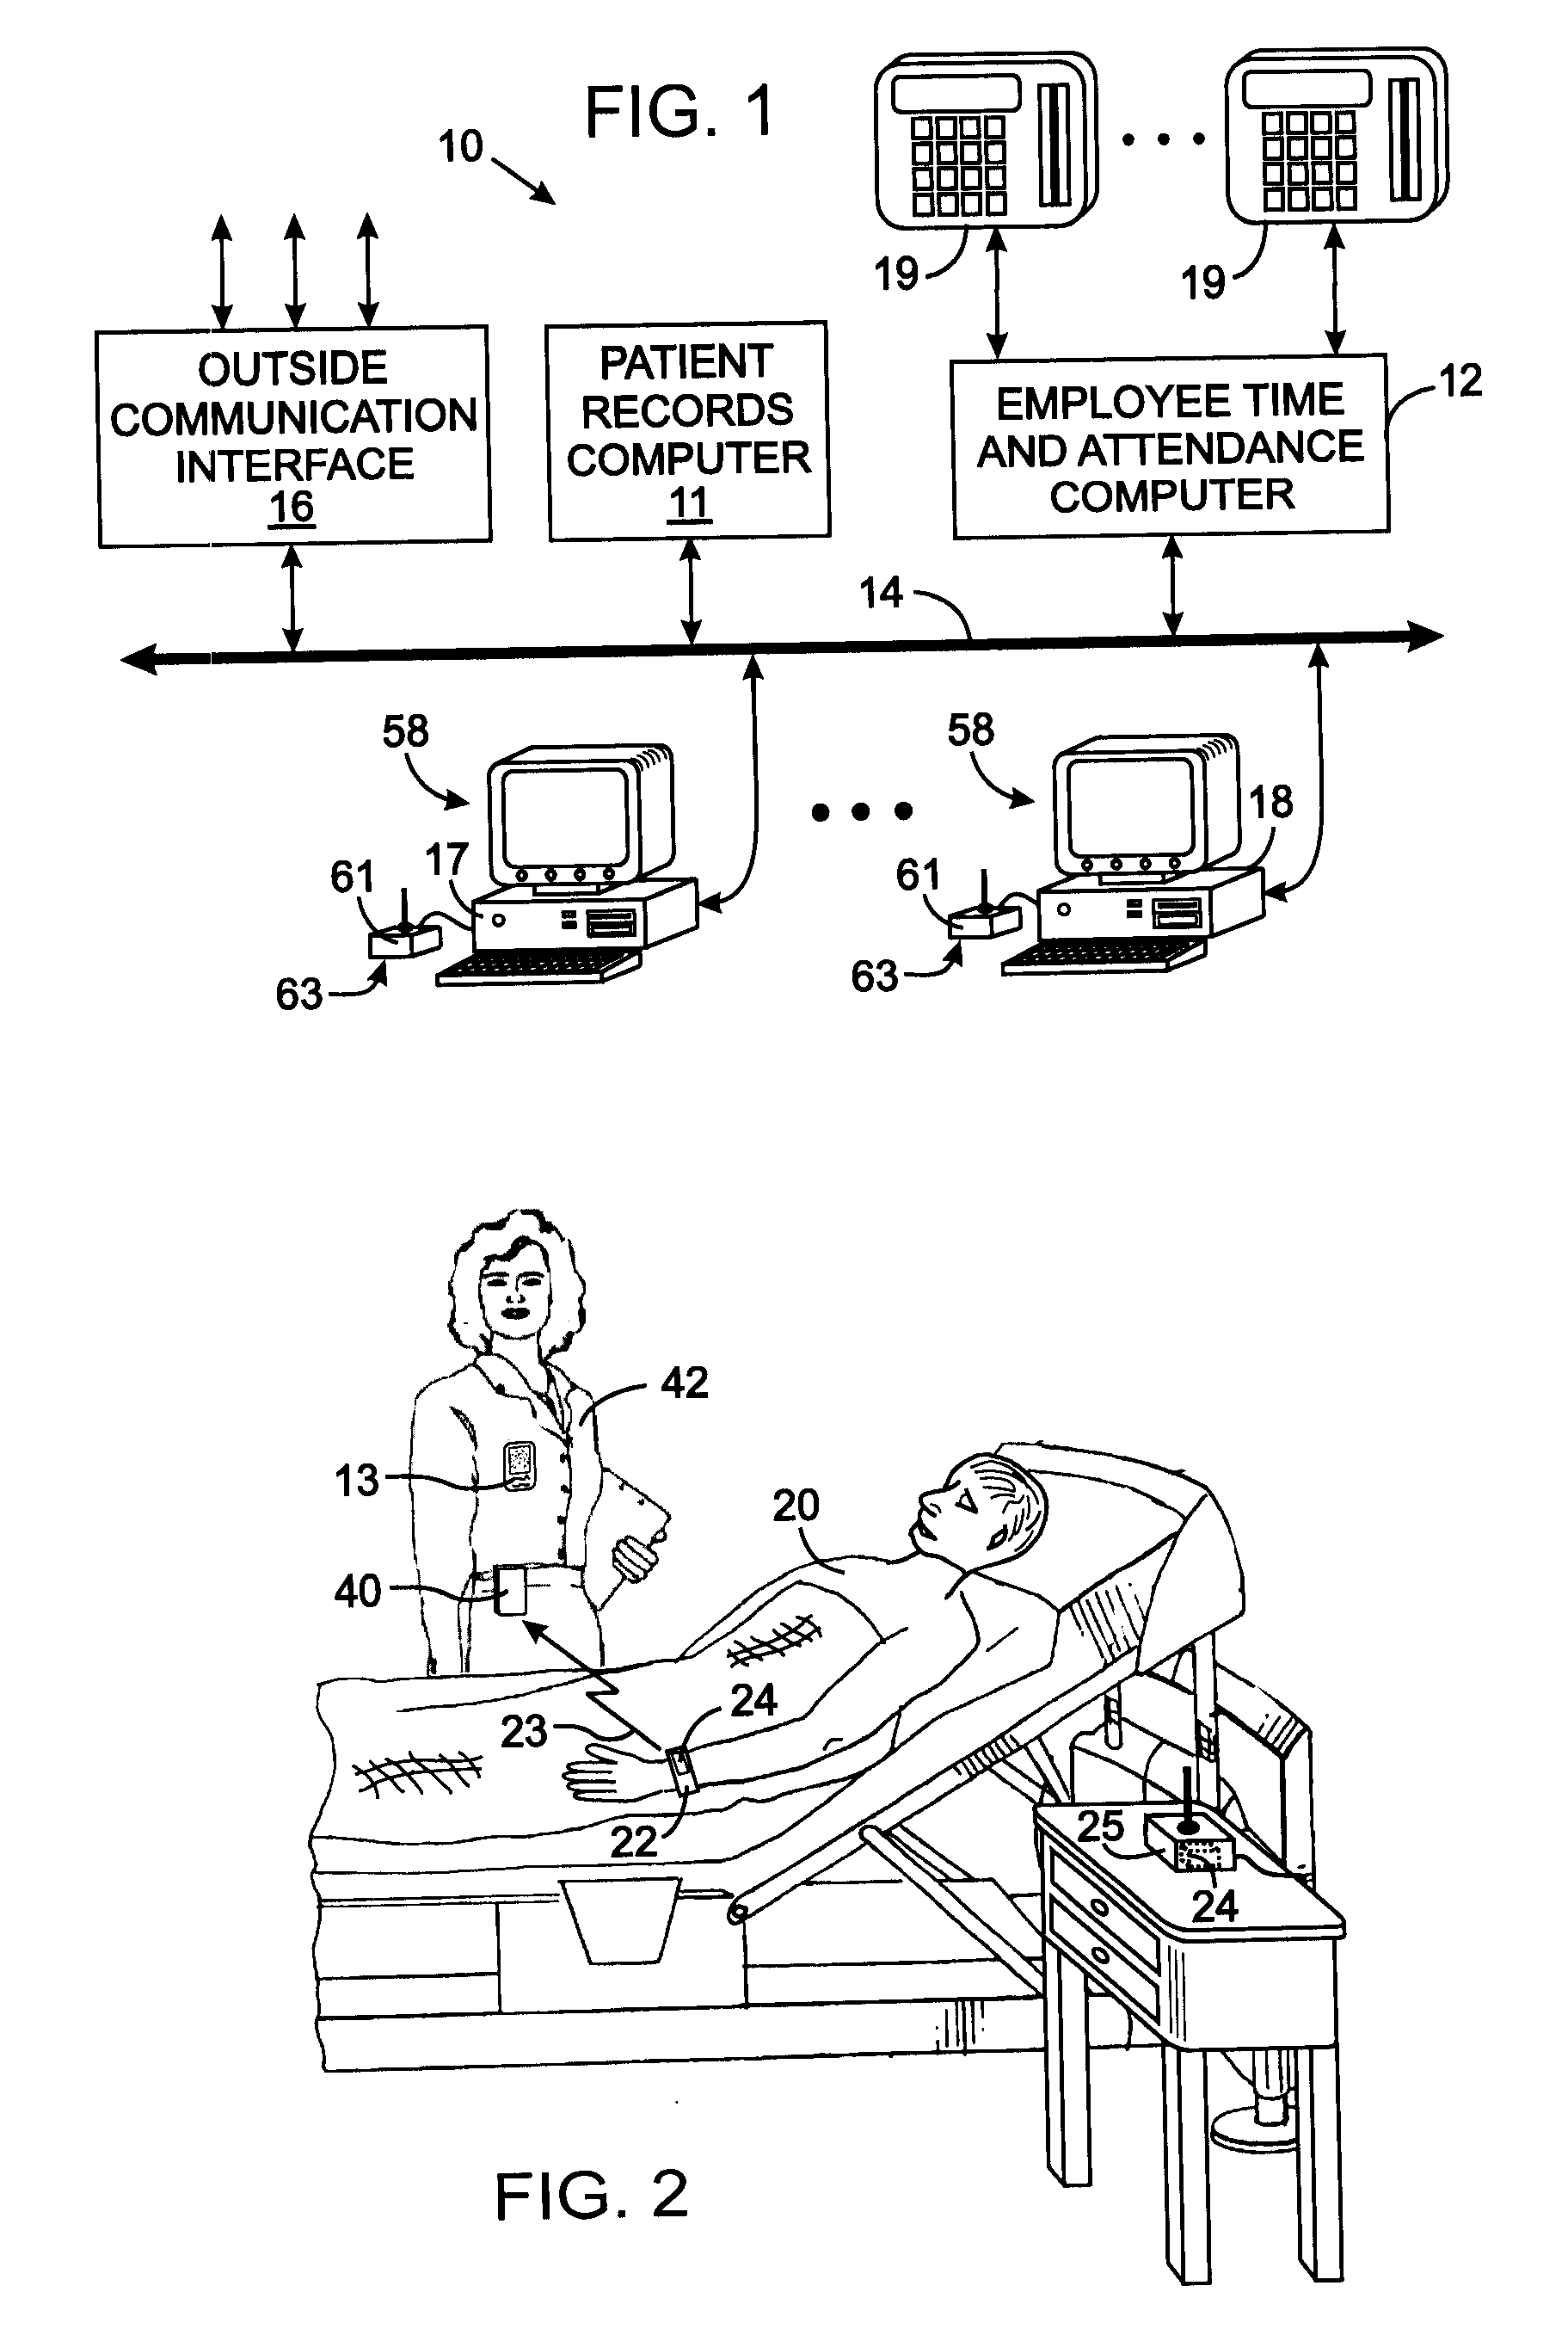 System and Method For Monitoring Home Healthcare Workers